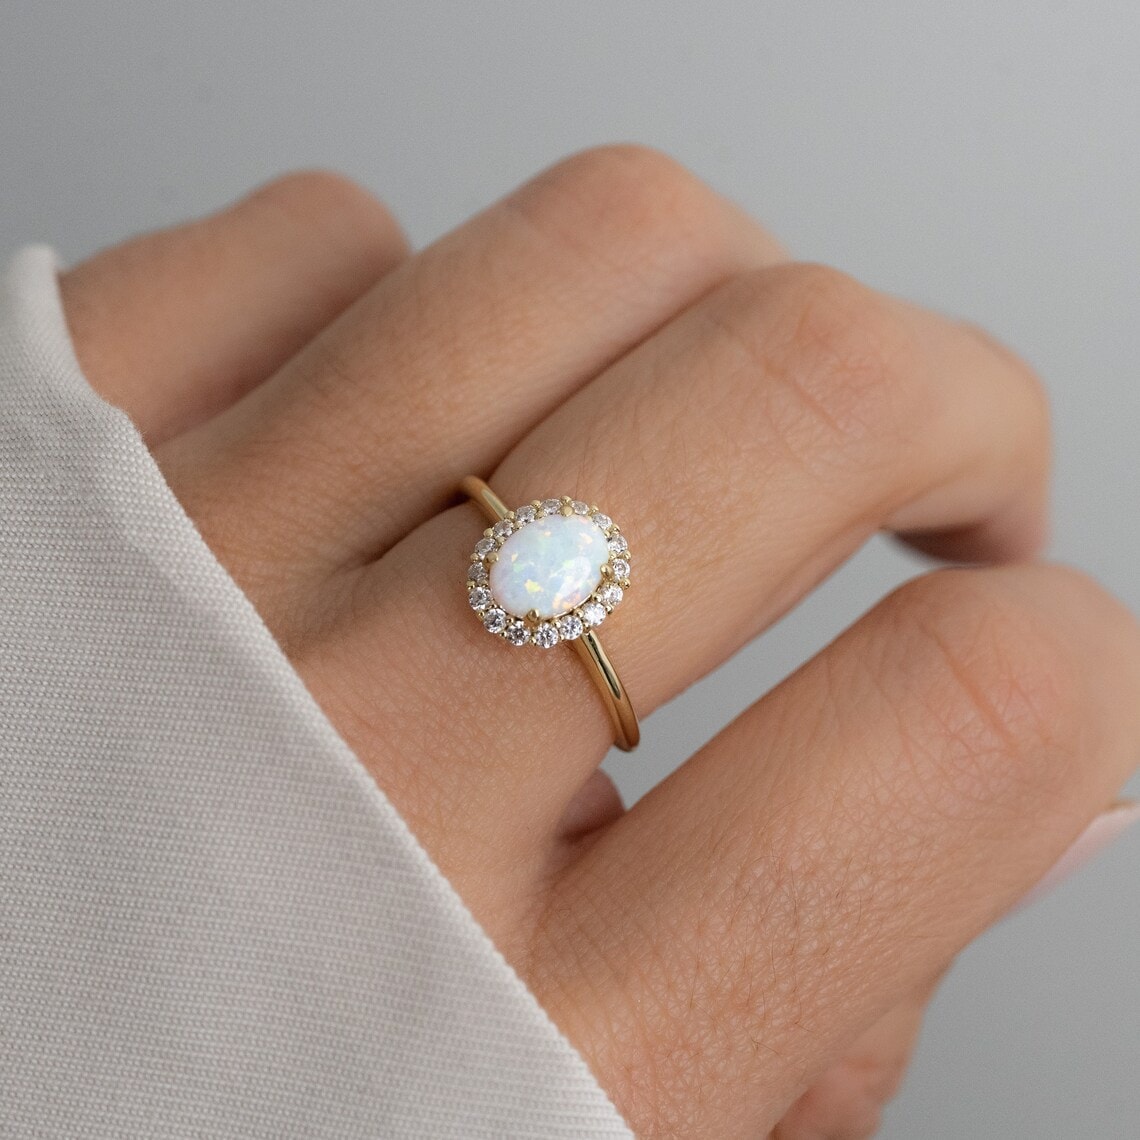 dainty opal ring on the middle finger